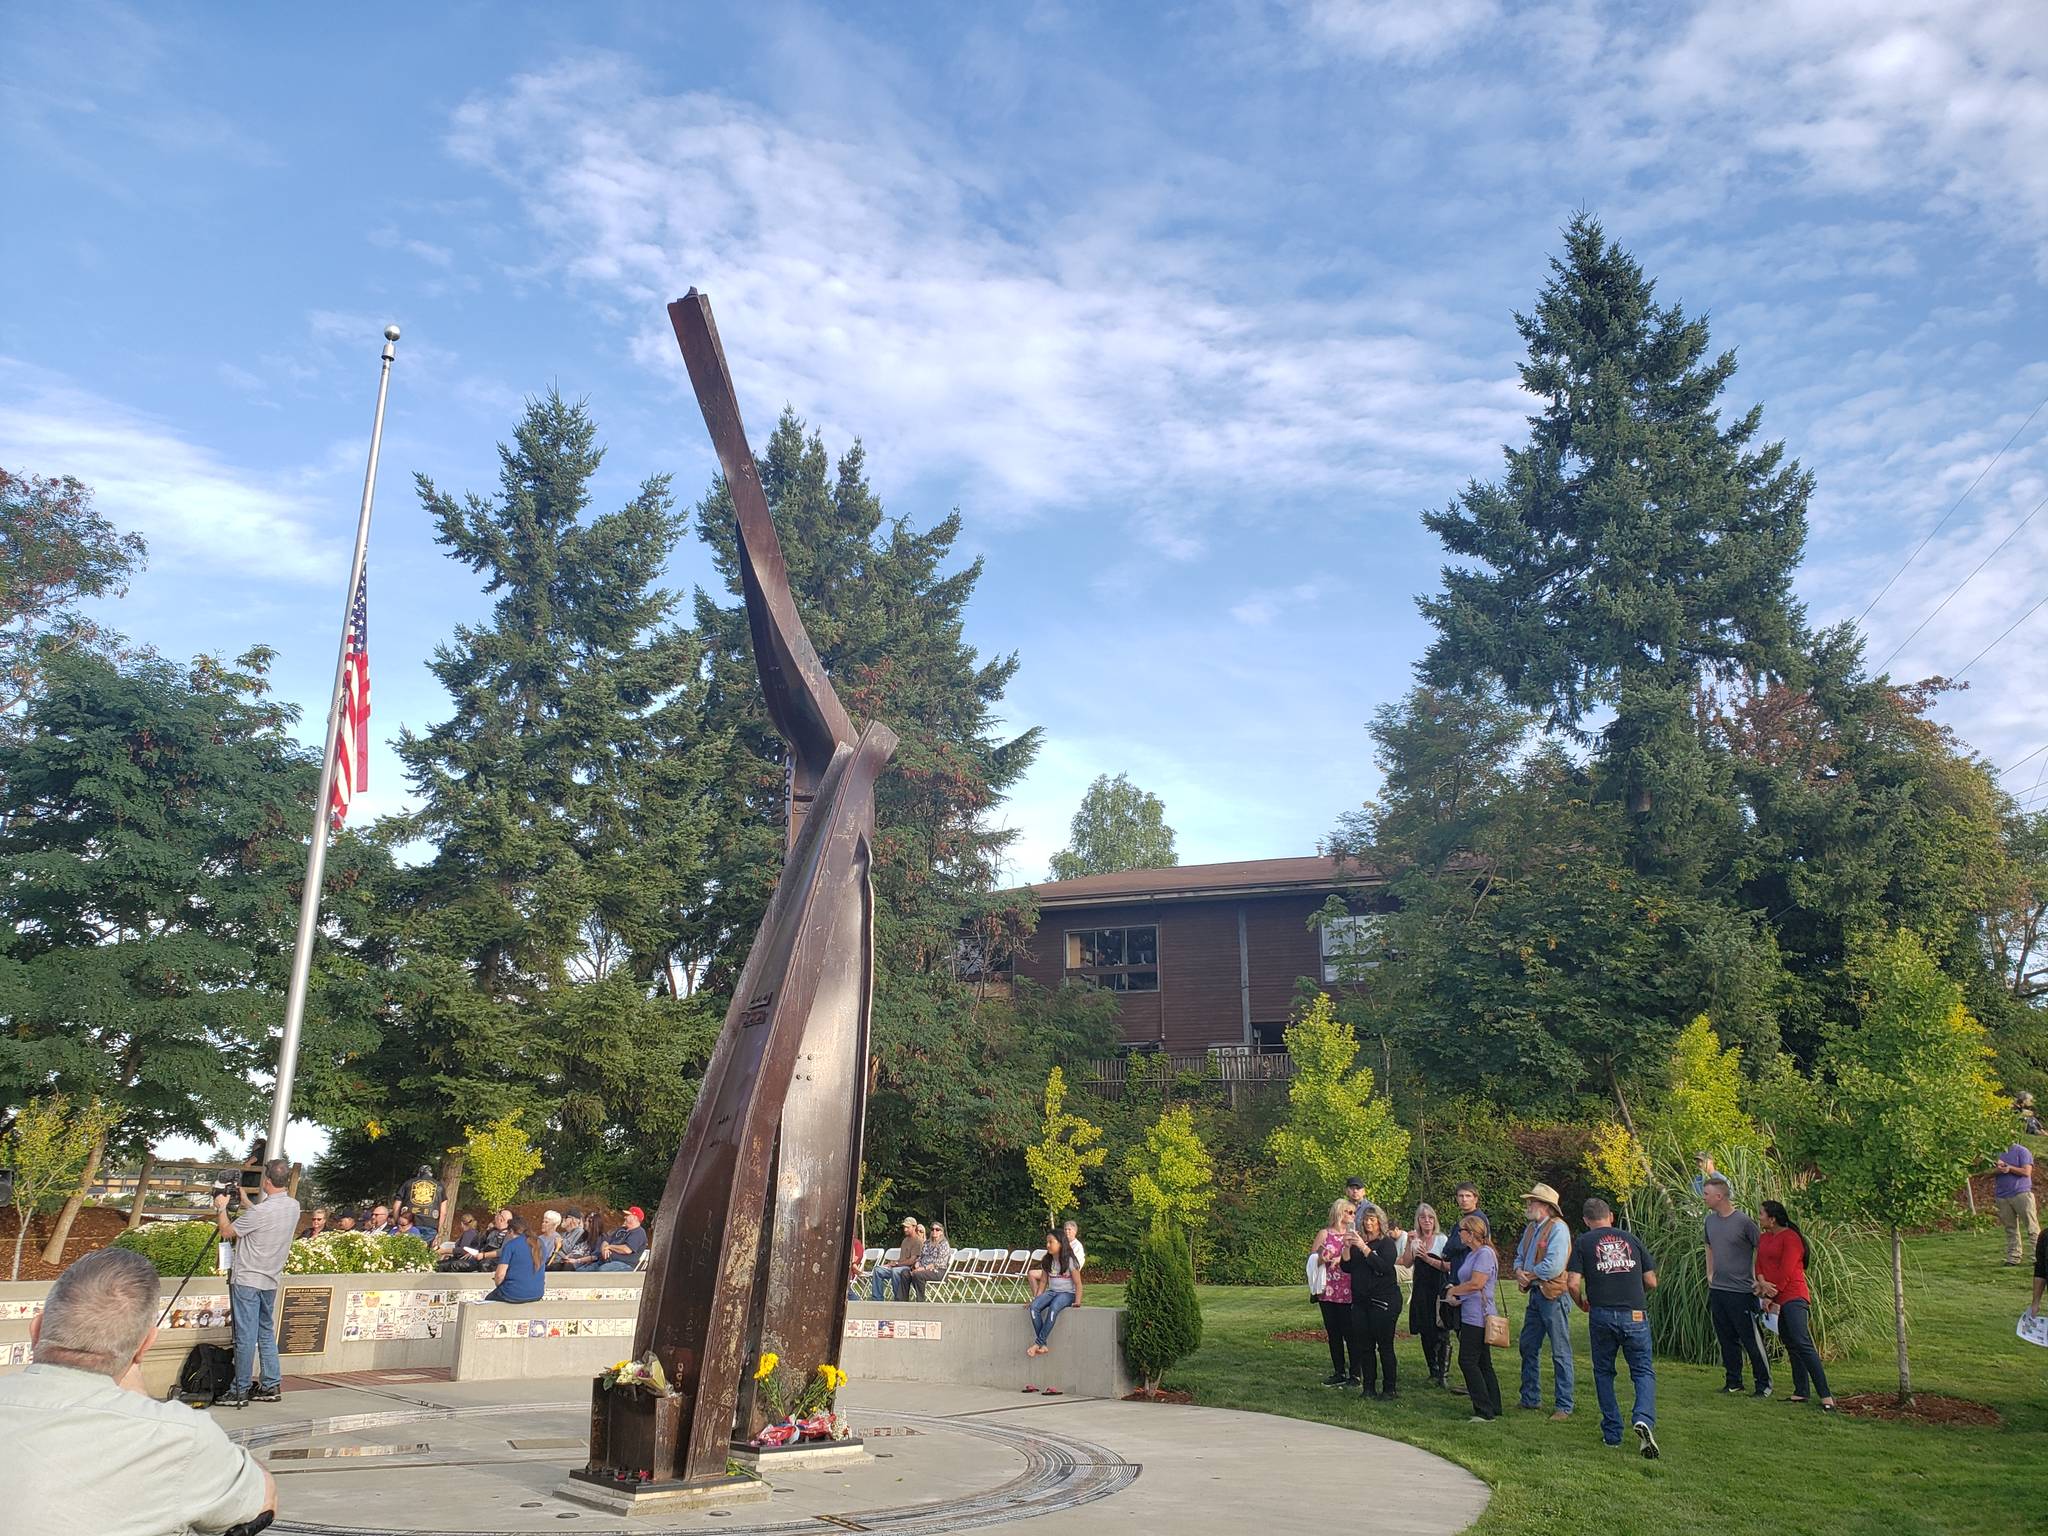 Ceremony remembers those who were lost in 9/11 attacks